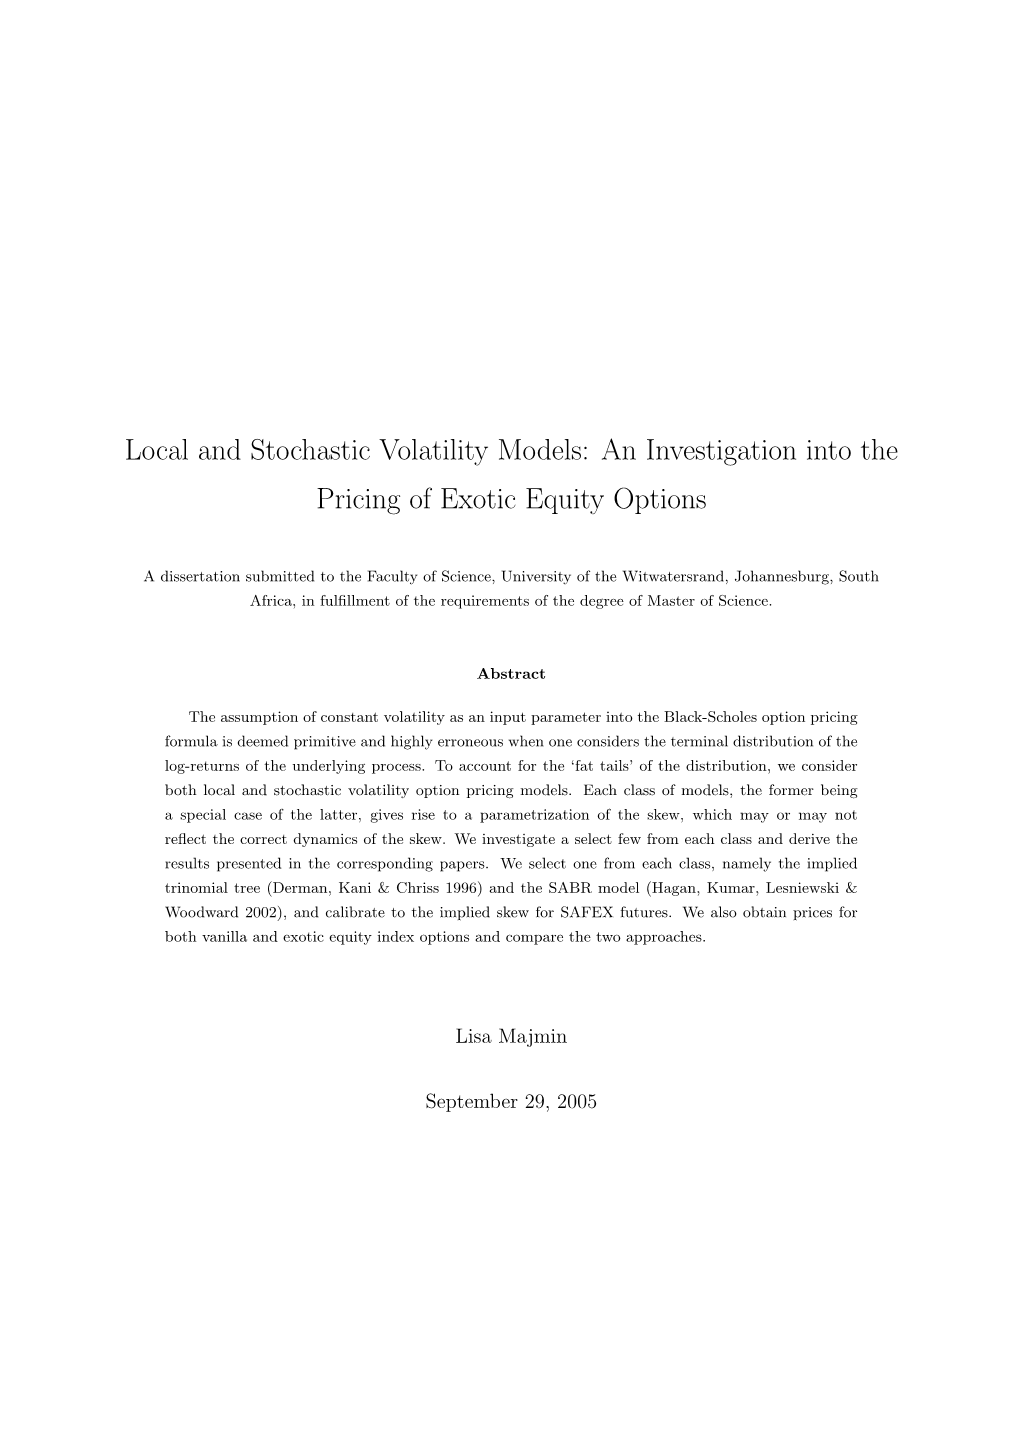 Local and Stochastic Volatility Models: an Investigation Into the Pricing of Exotic Equity Options